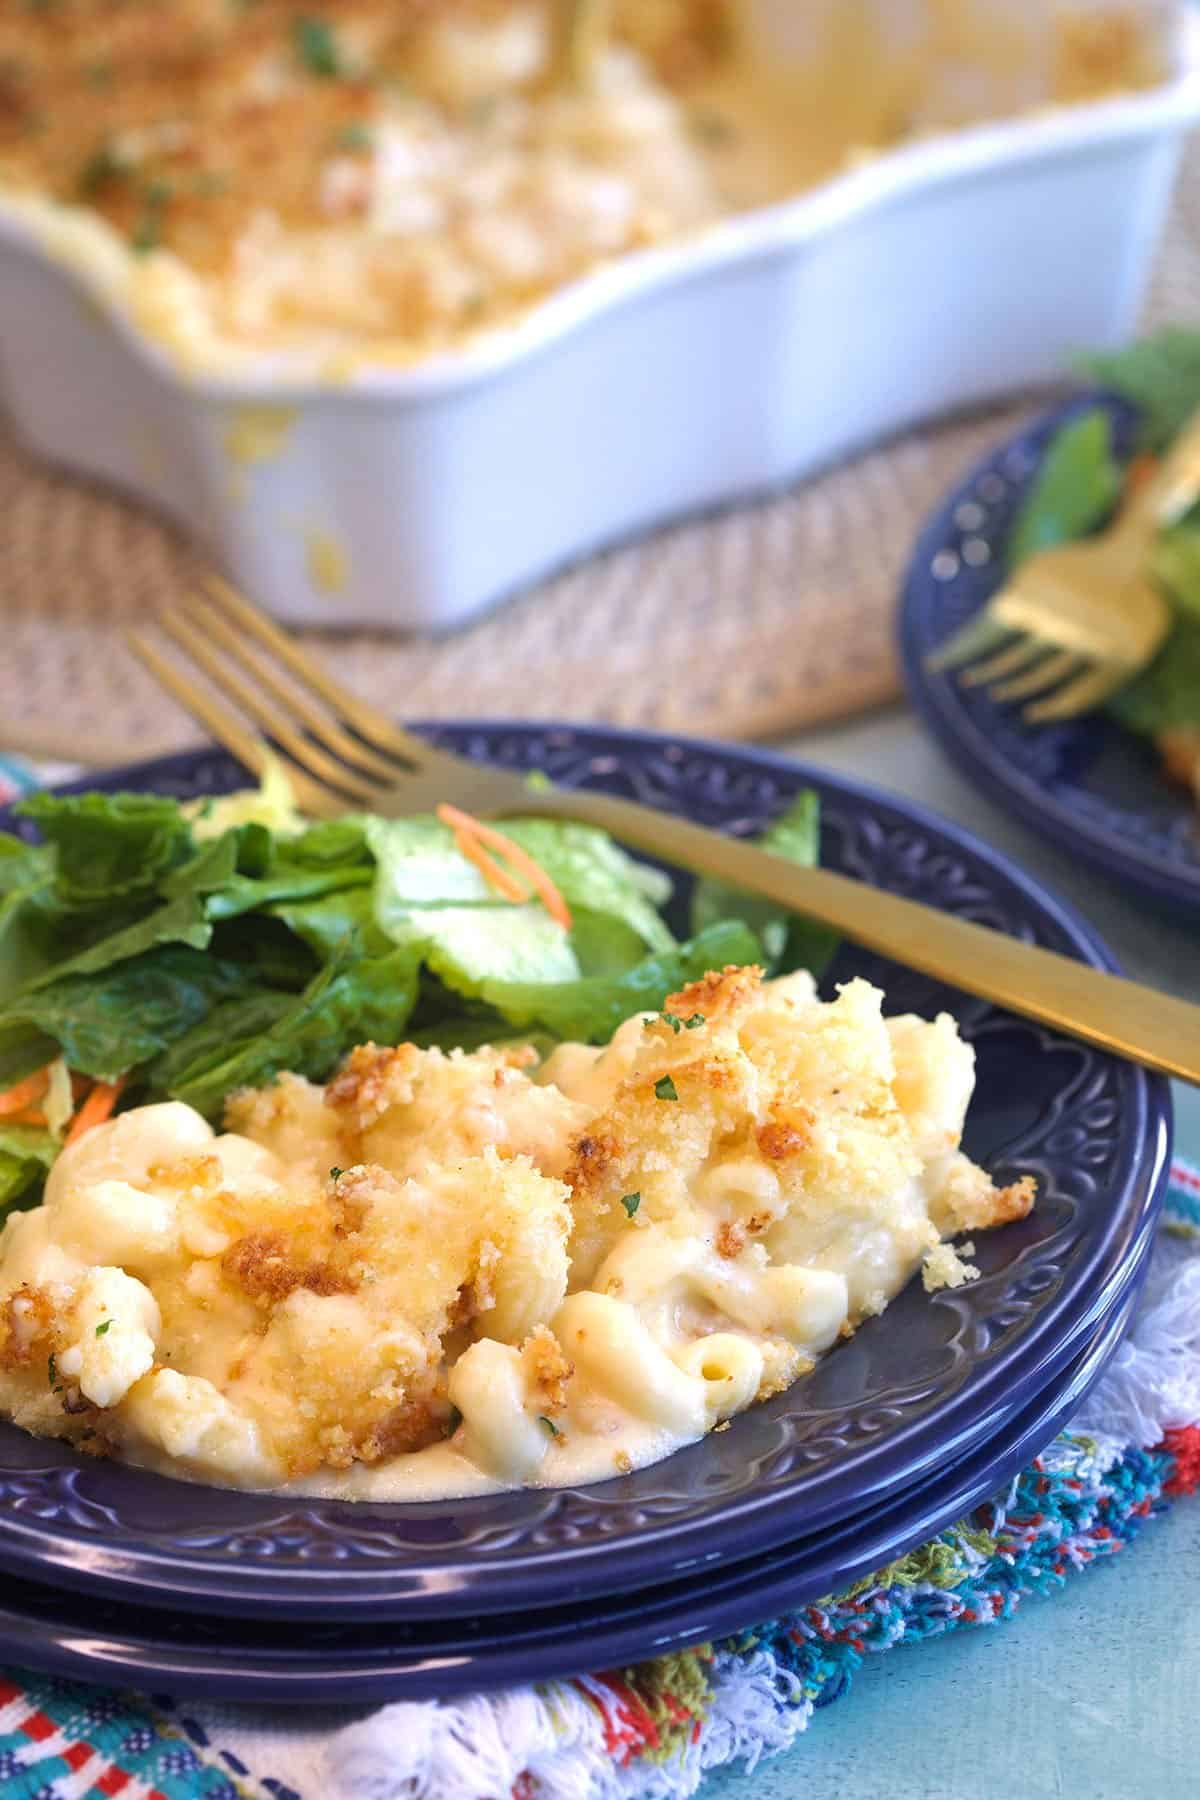 Baked macaroni and cheese on a blue plate with a salad and a gold fork.